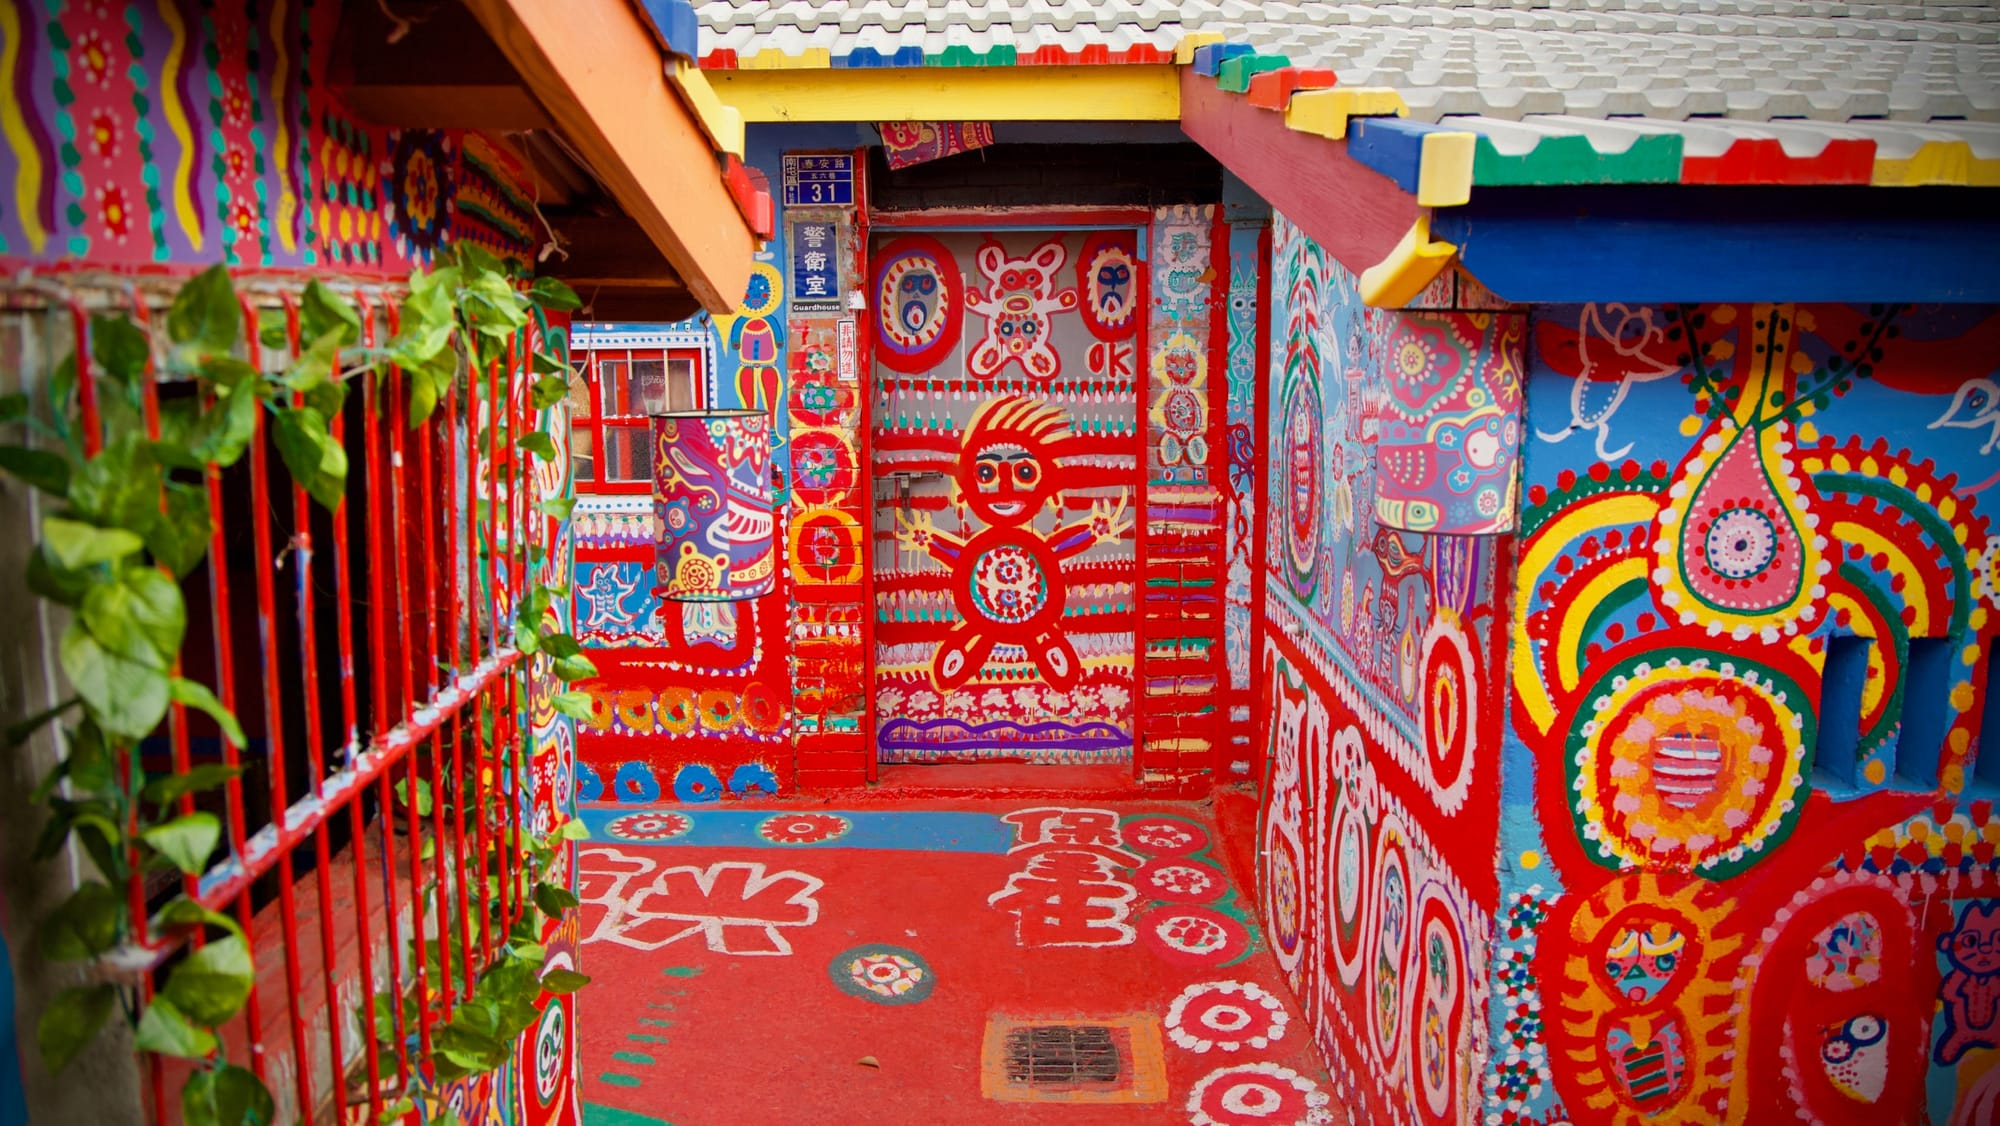 A house with street number 31 in Rainbow Village. The walls of the house, and the ground, are brightly painted with abstract art.